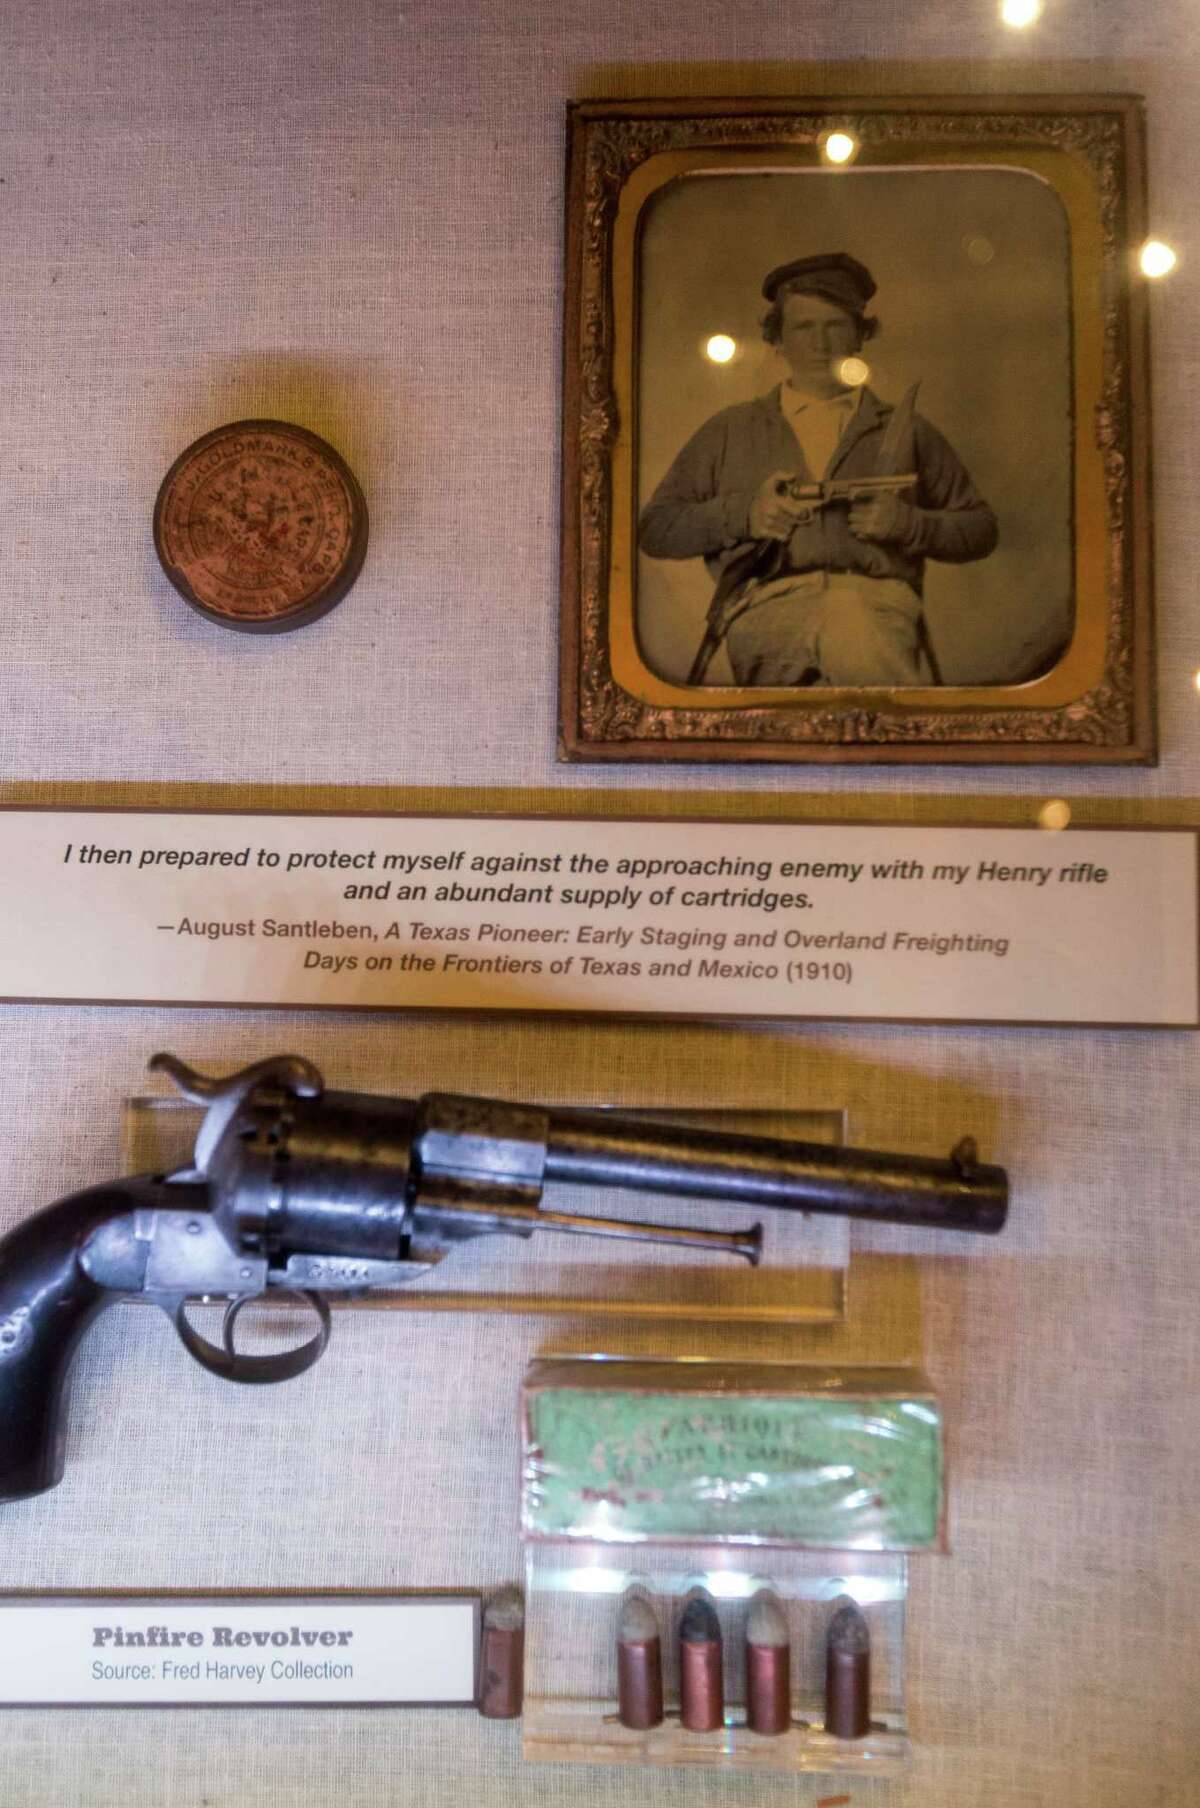 A Pinfire Revolver lays on display in the "Firearms of the Texas Frontier" exhibit at the Alamo in San Antonio, TX on Wednesday, January 28, 2014. The exhibit looks at the evolution of firearms in the 40 years following the 1836 Battle of the Alamo.